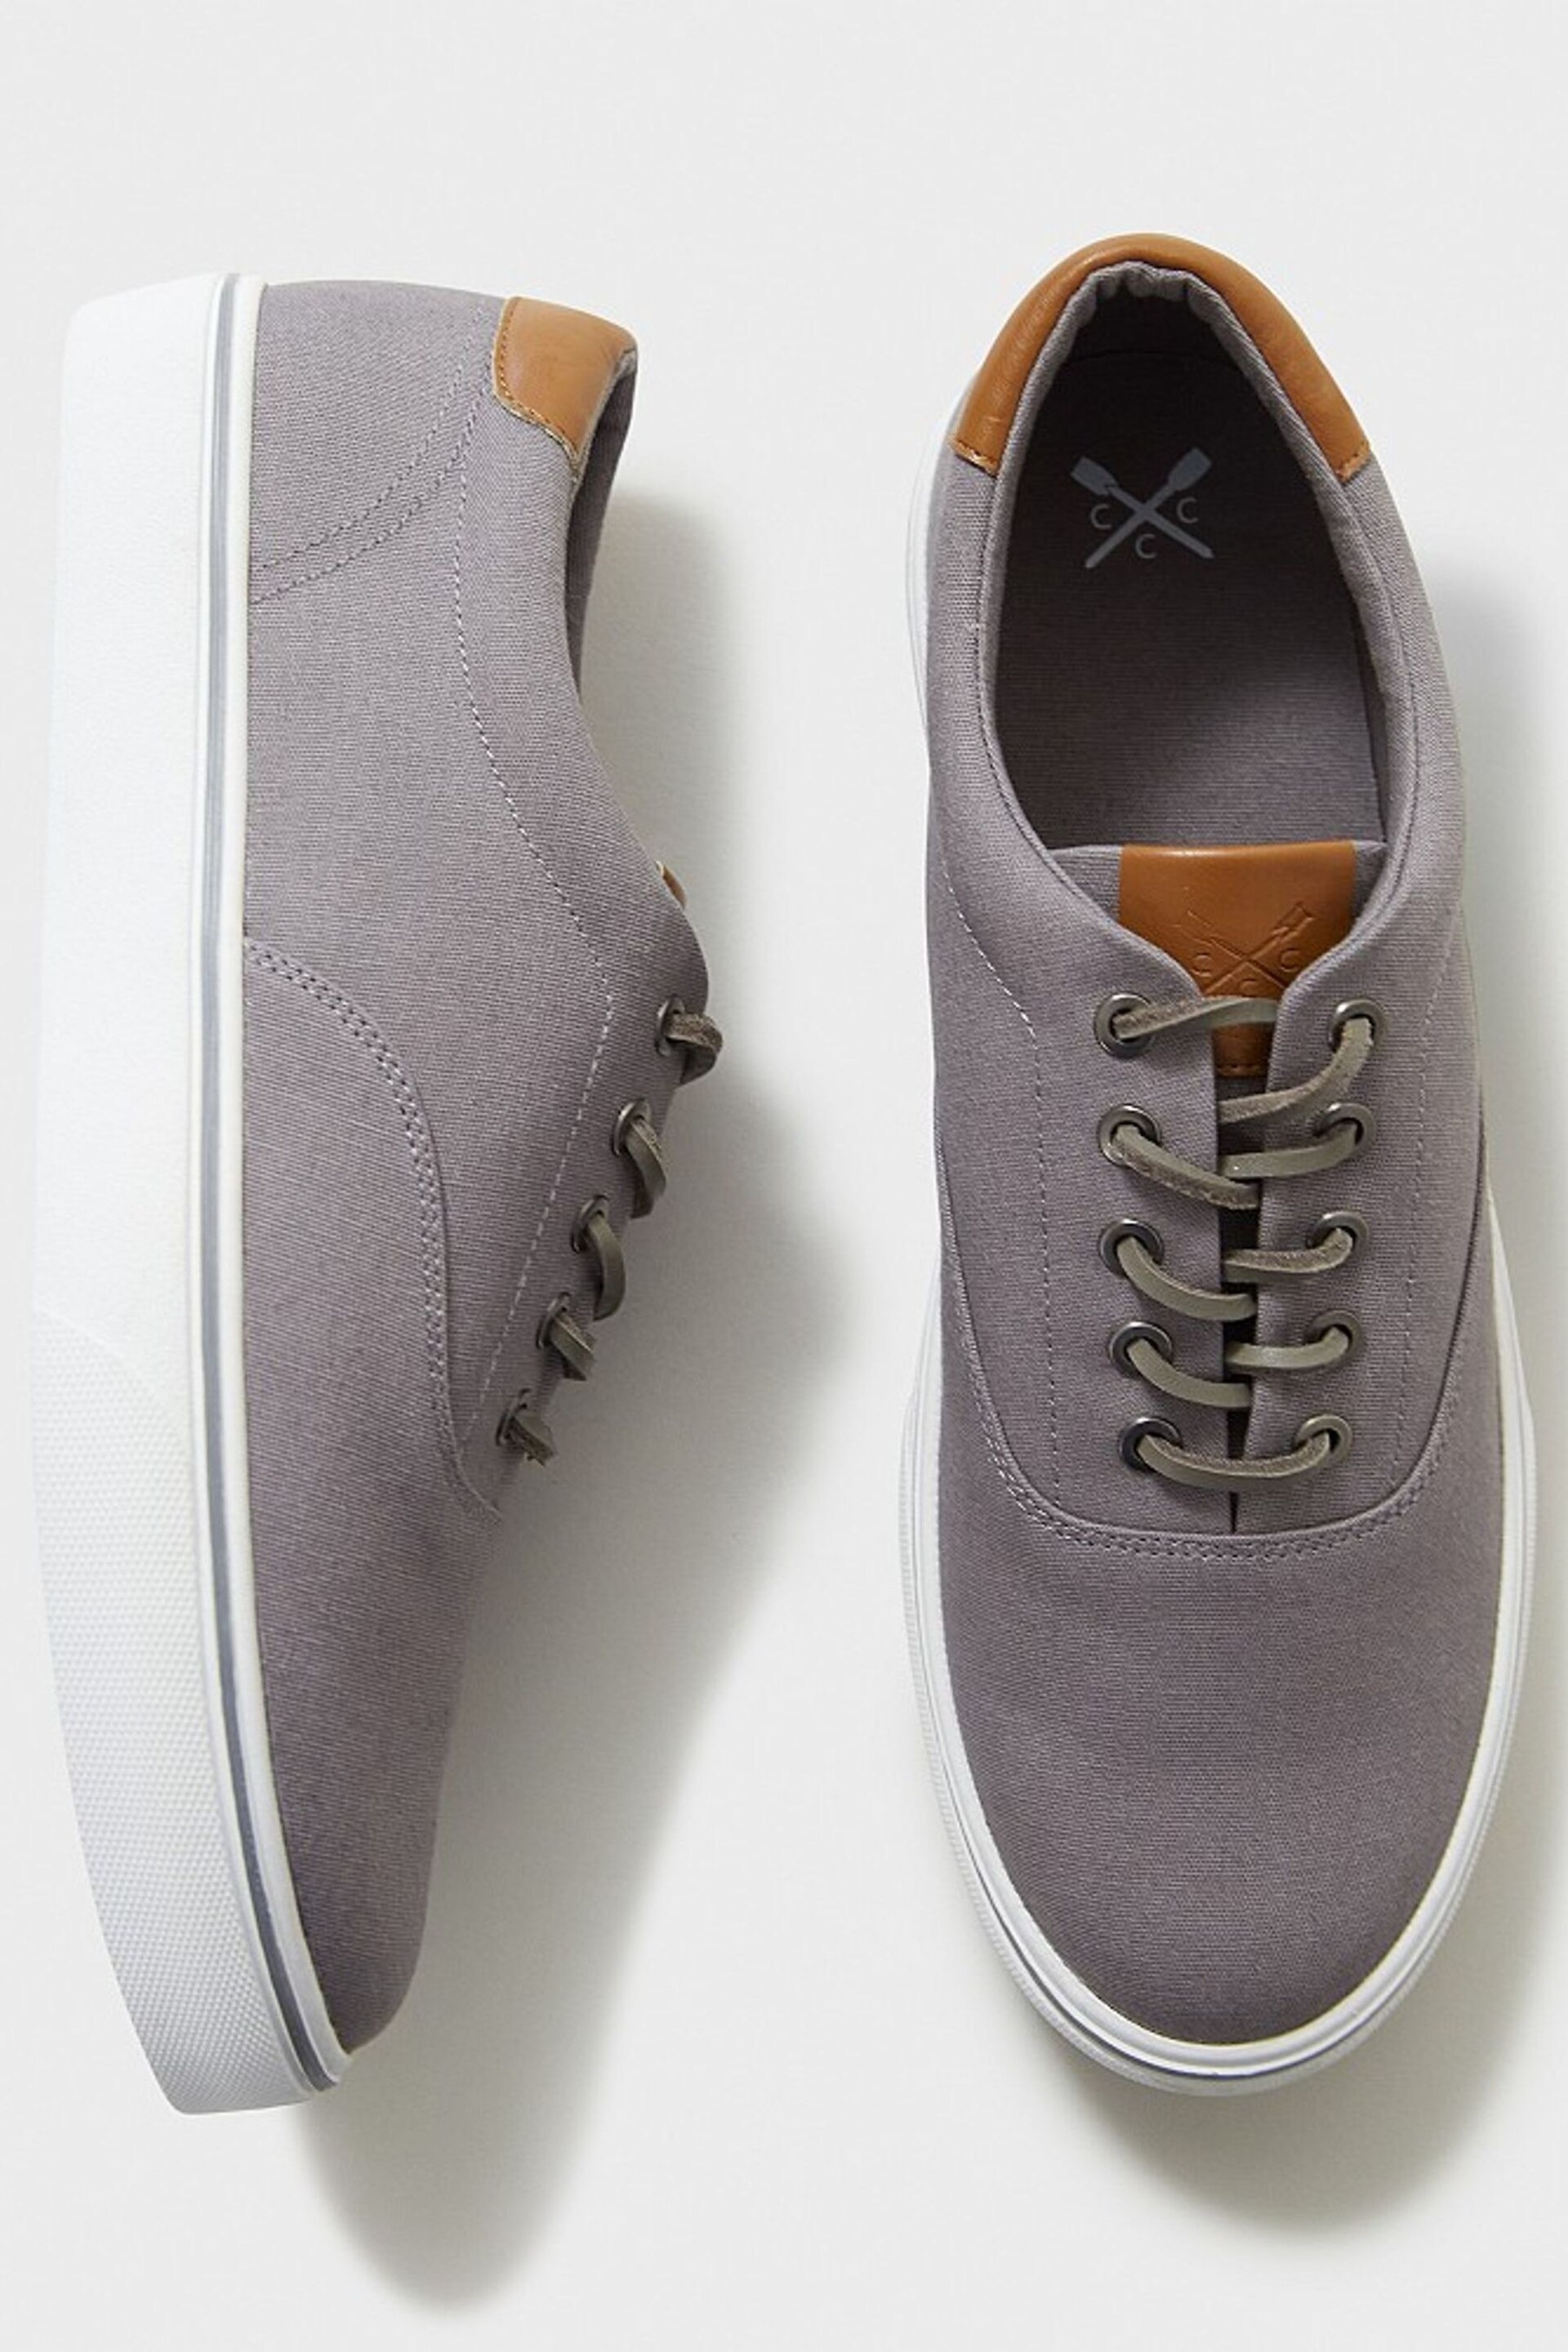 Crew Clothing Oxford Canvas Trainers - Image 3 of 5